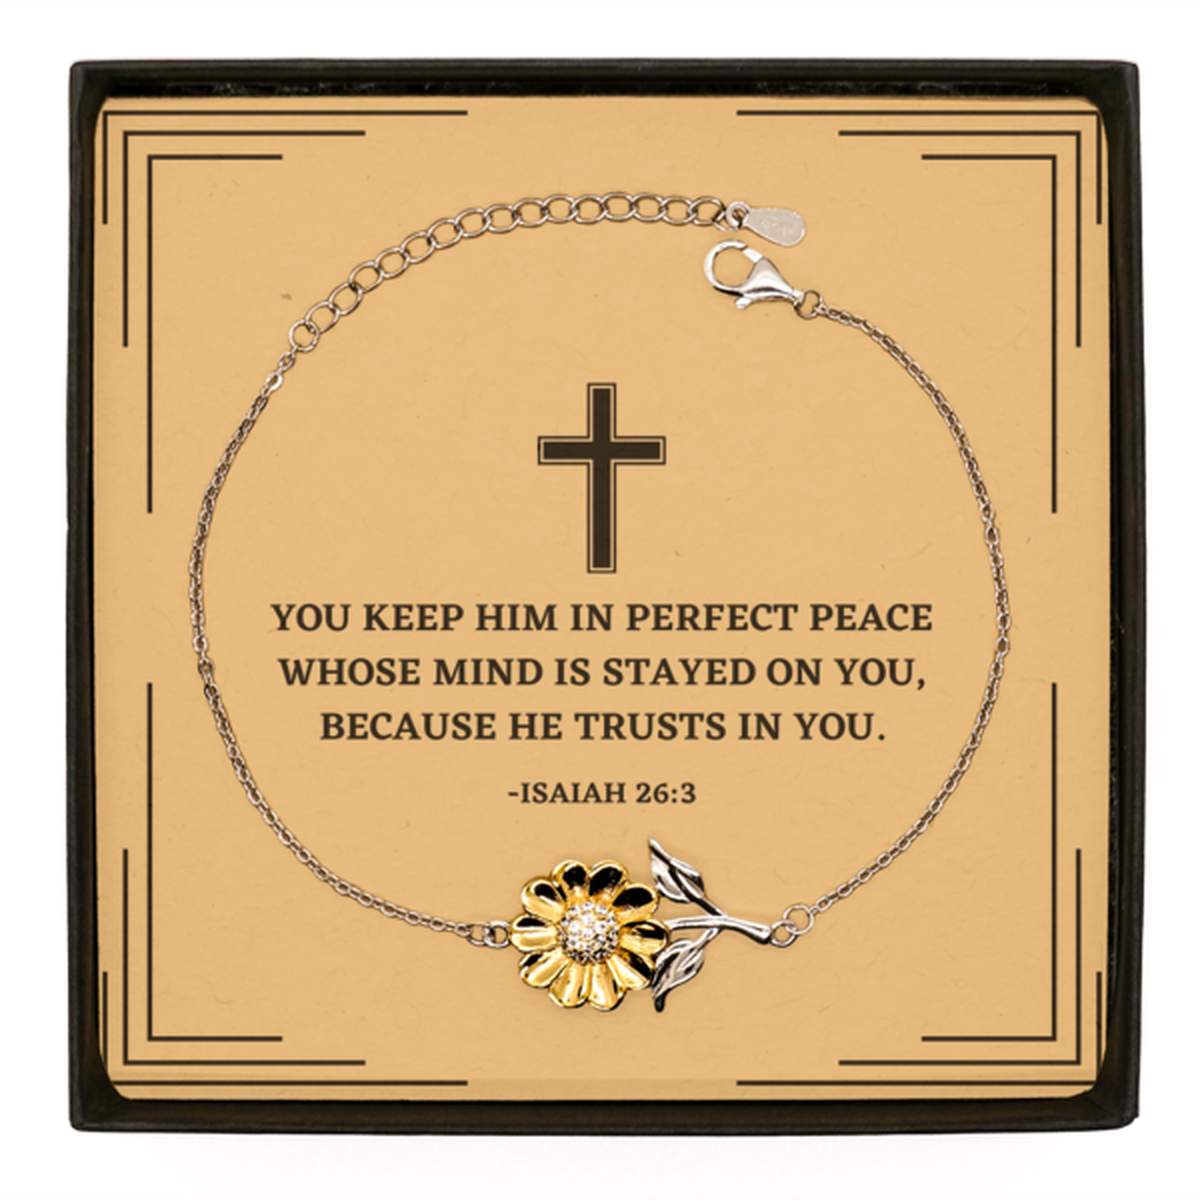 Baptism Gifts For Teenage Boys Girls, Christian Bible Verse Sterling Silver Sunflower Bracelet, You keep him in perfect peace, Confirmation Gifts, Bible Verse Card for Son, Godson, Grandson